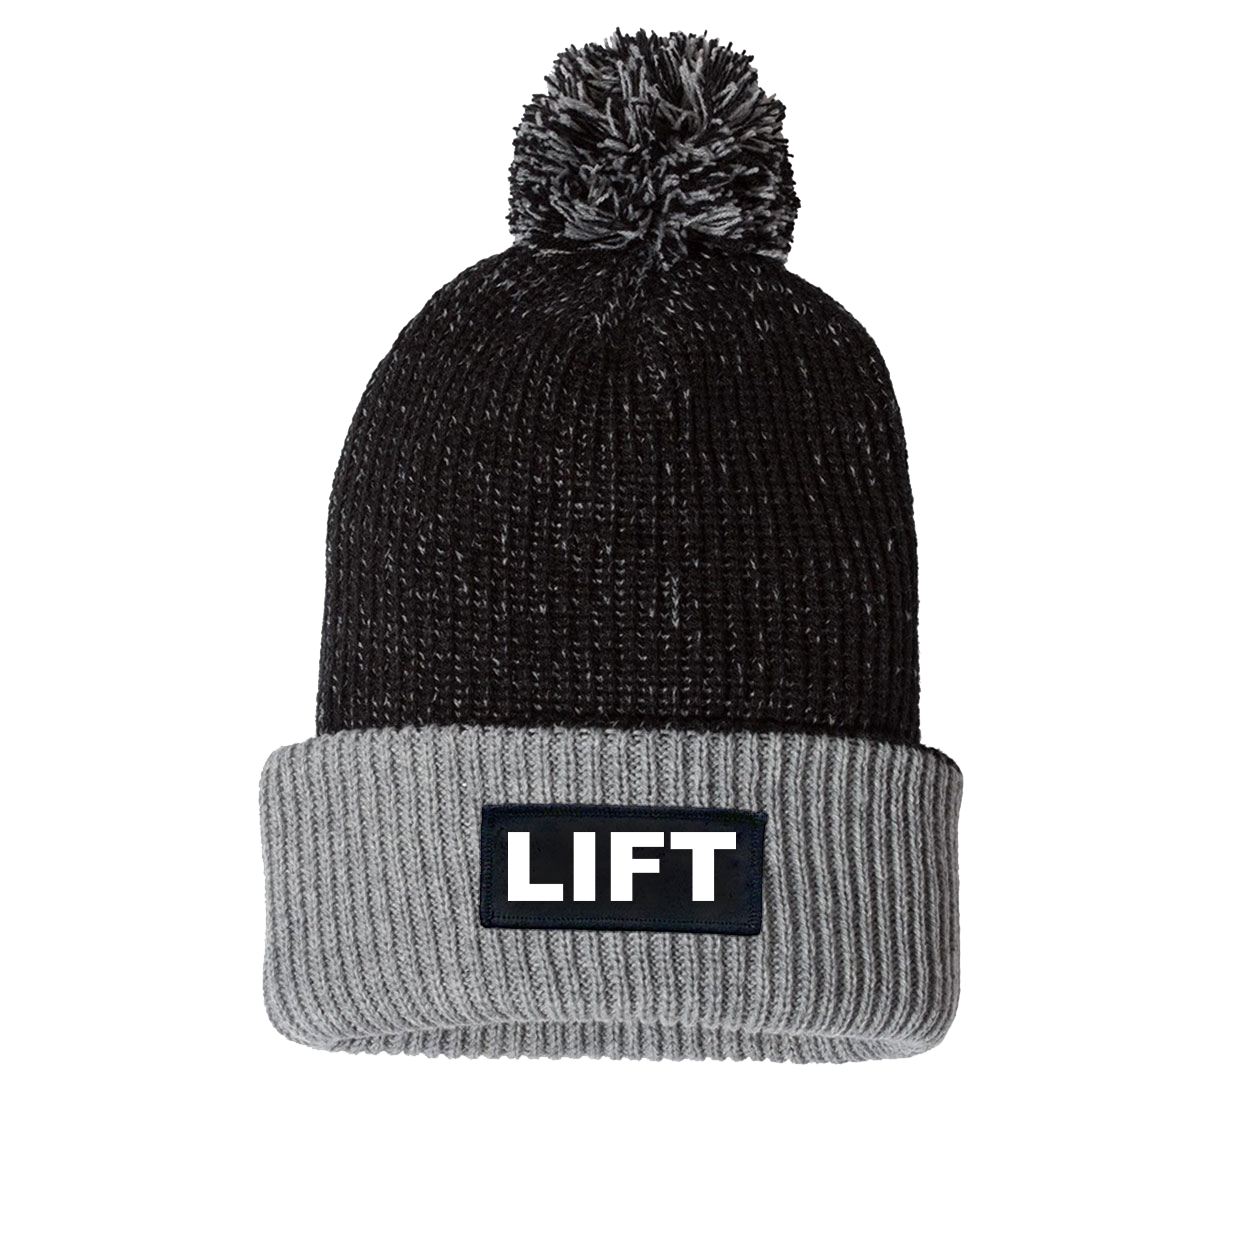 Lift Brand Logo Night Out Woven Patch Roll Up Pom Knit Beanie Black/Gray